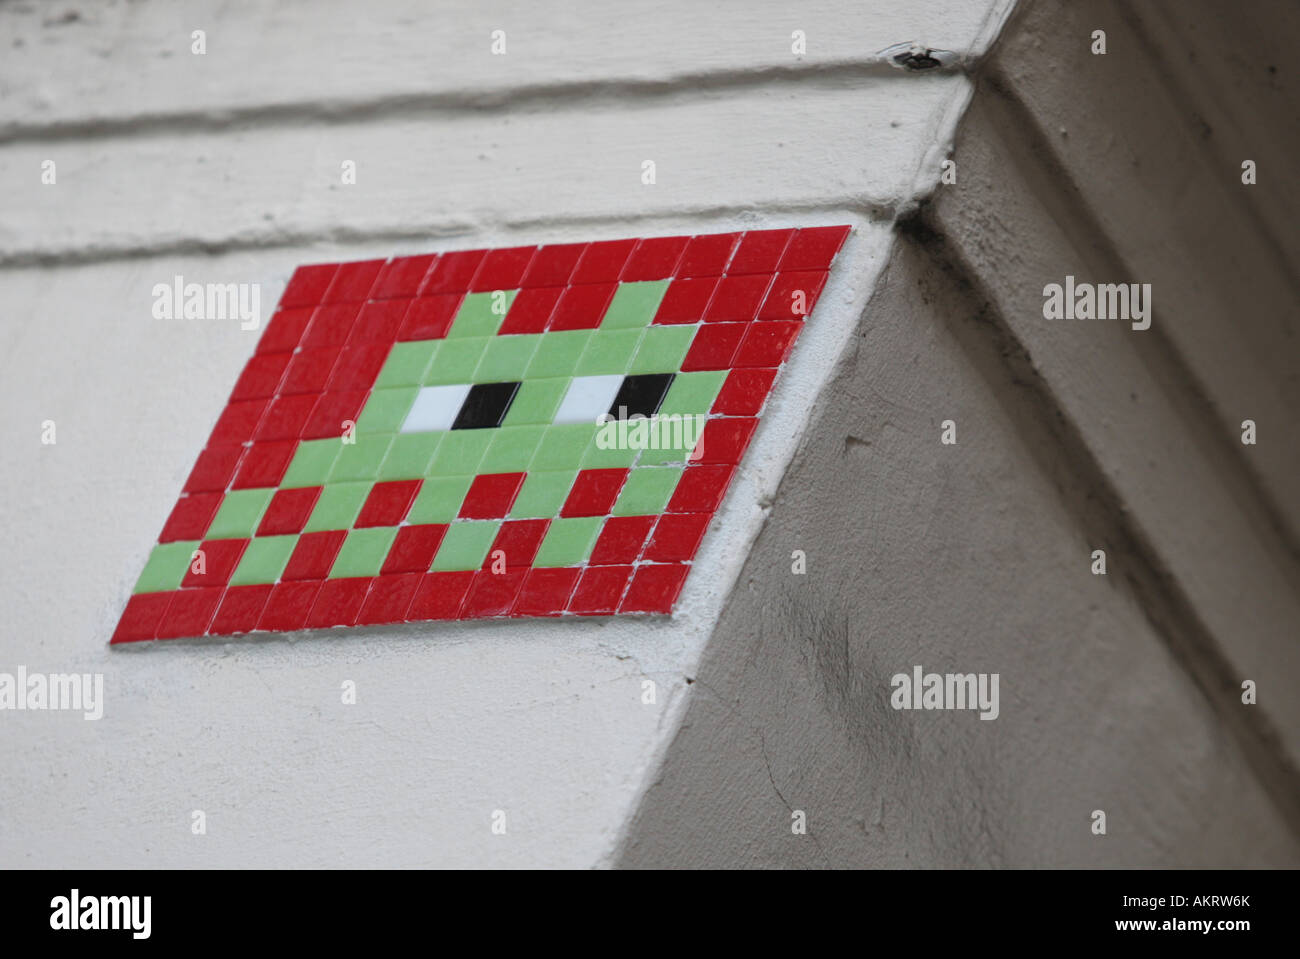 A GV of street art in London, England by guerilla artist 'Space Invader' Stock Photo